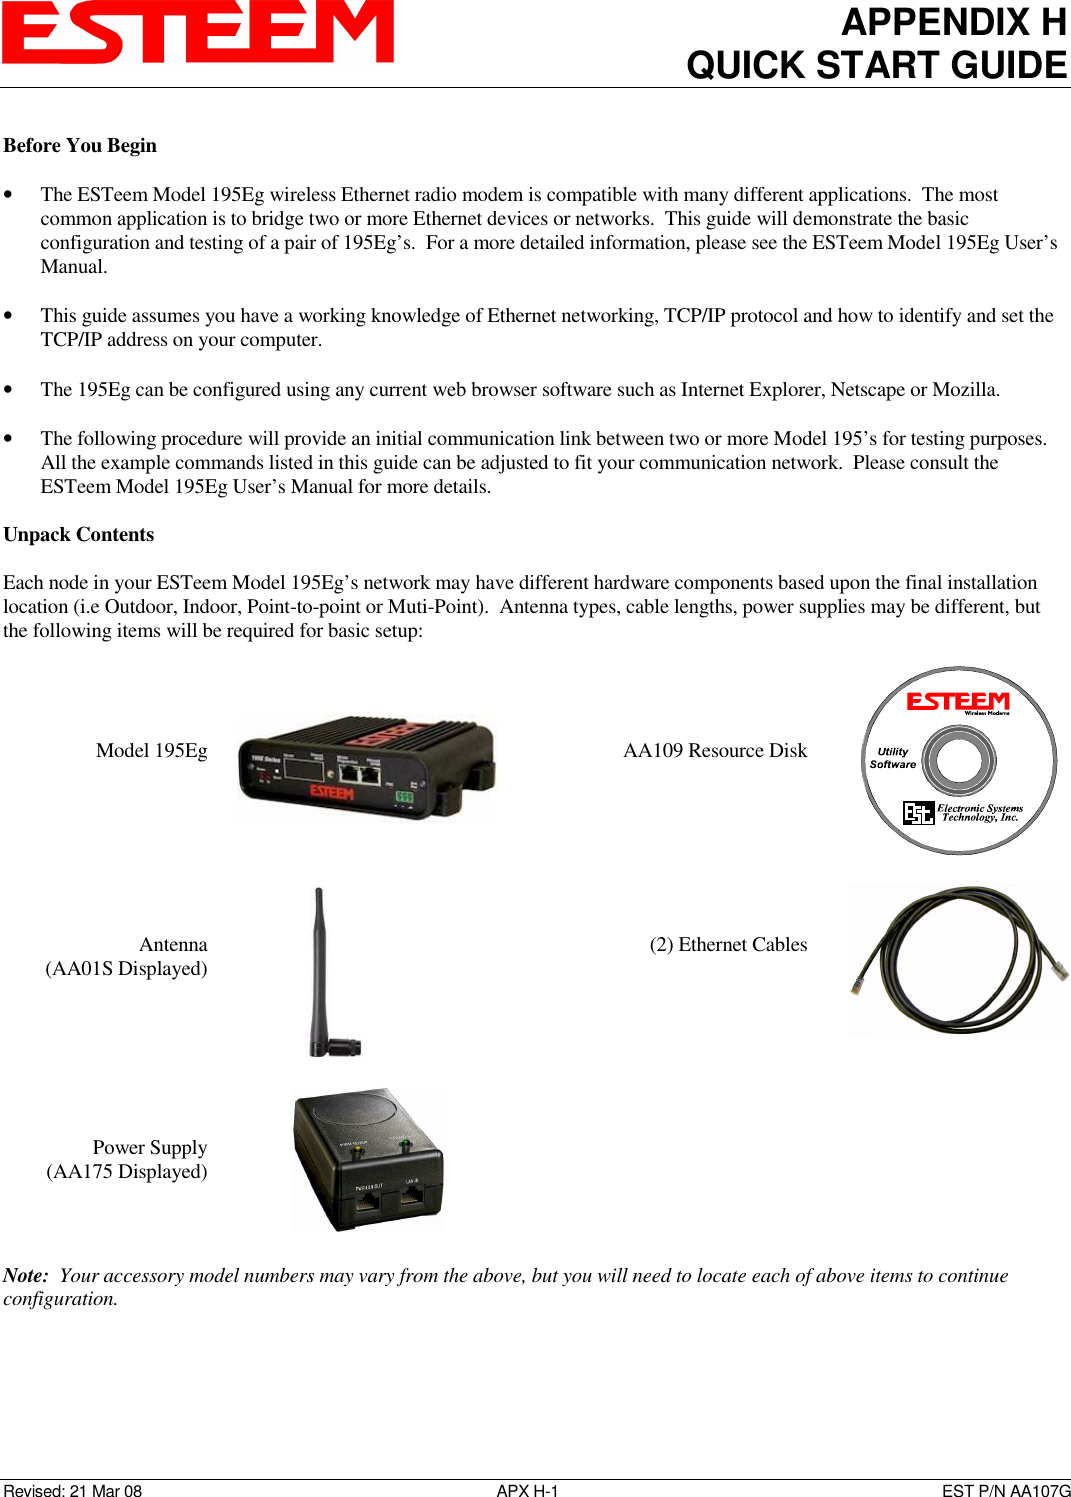 APPENDIX H QUICK START GUIDE   Revised: 21 Mar 08  APX H-1  EST P/N AA107G Before You Begin  • The ESTeem Model 195Eg wireless Ethernet radio modem is compatible with many different applications.  The most common application is to bridge two or more Ethernet devices or networks.  This guide will demonstrate the basic configuration and testing of a pair of 195Eg’s.  For a more detailed information, please see the ESTeem Model 195Eg User’s Manual.  • This guide assumes you have a working knowledge of Ethernet networking, TCP/IP protocol and how to identify and set the TCP/IP address on your computer.  • The 195Eg can be configured using any current web browser software such as Internet Explorer, Netscape or Mozilla.  • The following procedure will provide an initial communication link between two or more Model 195’s for testing purposes.  All the example commands listed in this guide can be adjusted to fit your communication network.  Please consult the ESTeem Model 195Eg User’s Manual for more details.  Unpack Contents  Each node in your ESTeem Model 195Eg’s network may have different hardware components based upon the final installation location (i.e Outdoor, Indoor, Point-to-point or Muti-Point).  Antenna types, cable lengths, power supplies may be different, but the following items will be required for basic setup:     Model 195Eg       AA109 Resource Disk           Antenna  (AA01S Displayed)                    (2) Ethernet Cables           Power Supply (AA175 Displayed)      Note:  Your accessory model numbers may vary from the above, but you will need to locate each of above items to continue configuration.  